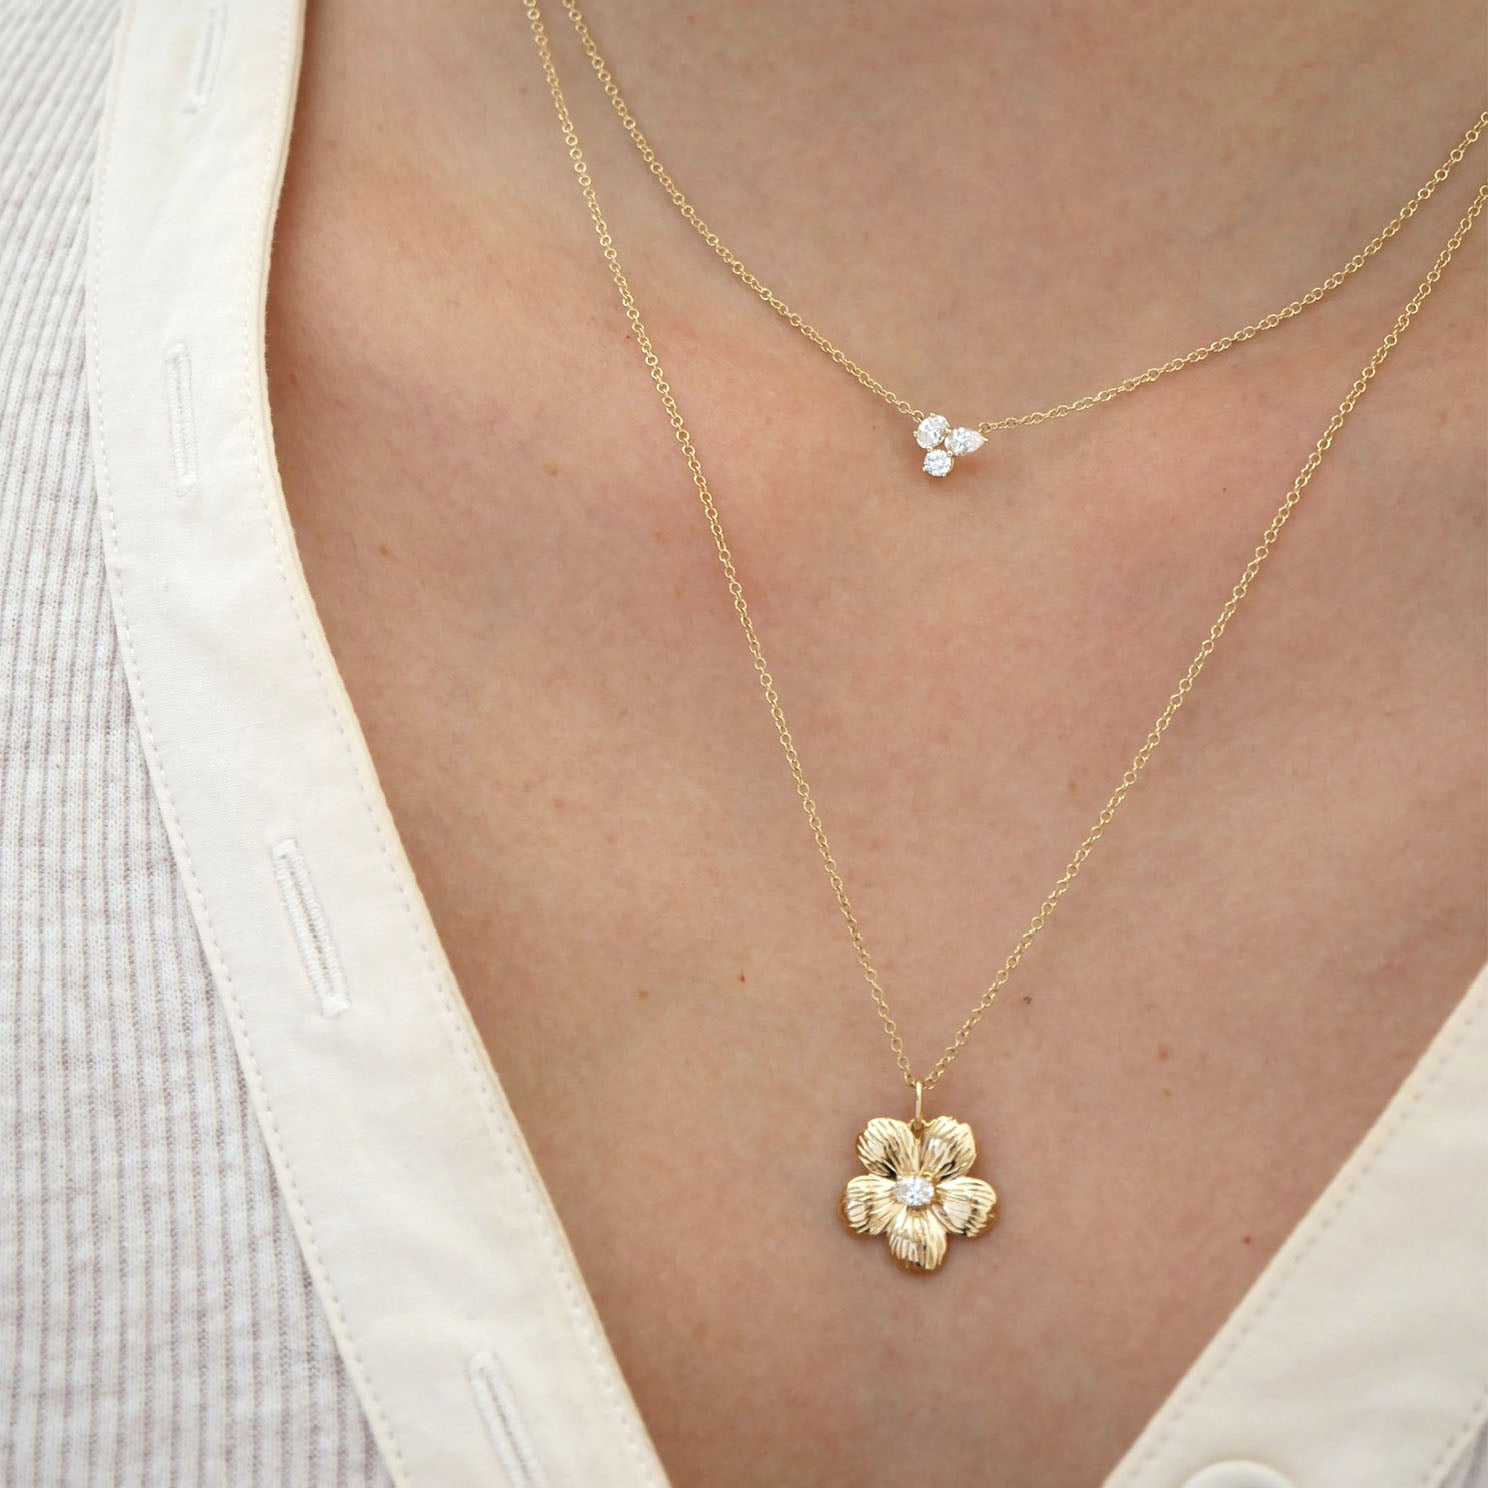 Cherry Blossom Necklace in 14k yellow gold styled on neck with diamond necklace